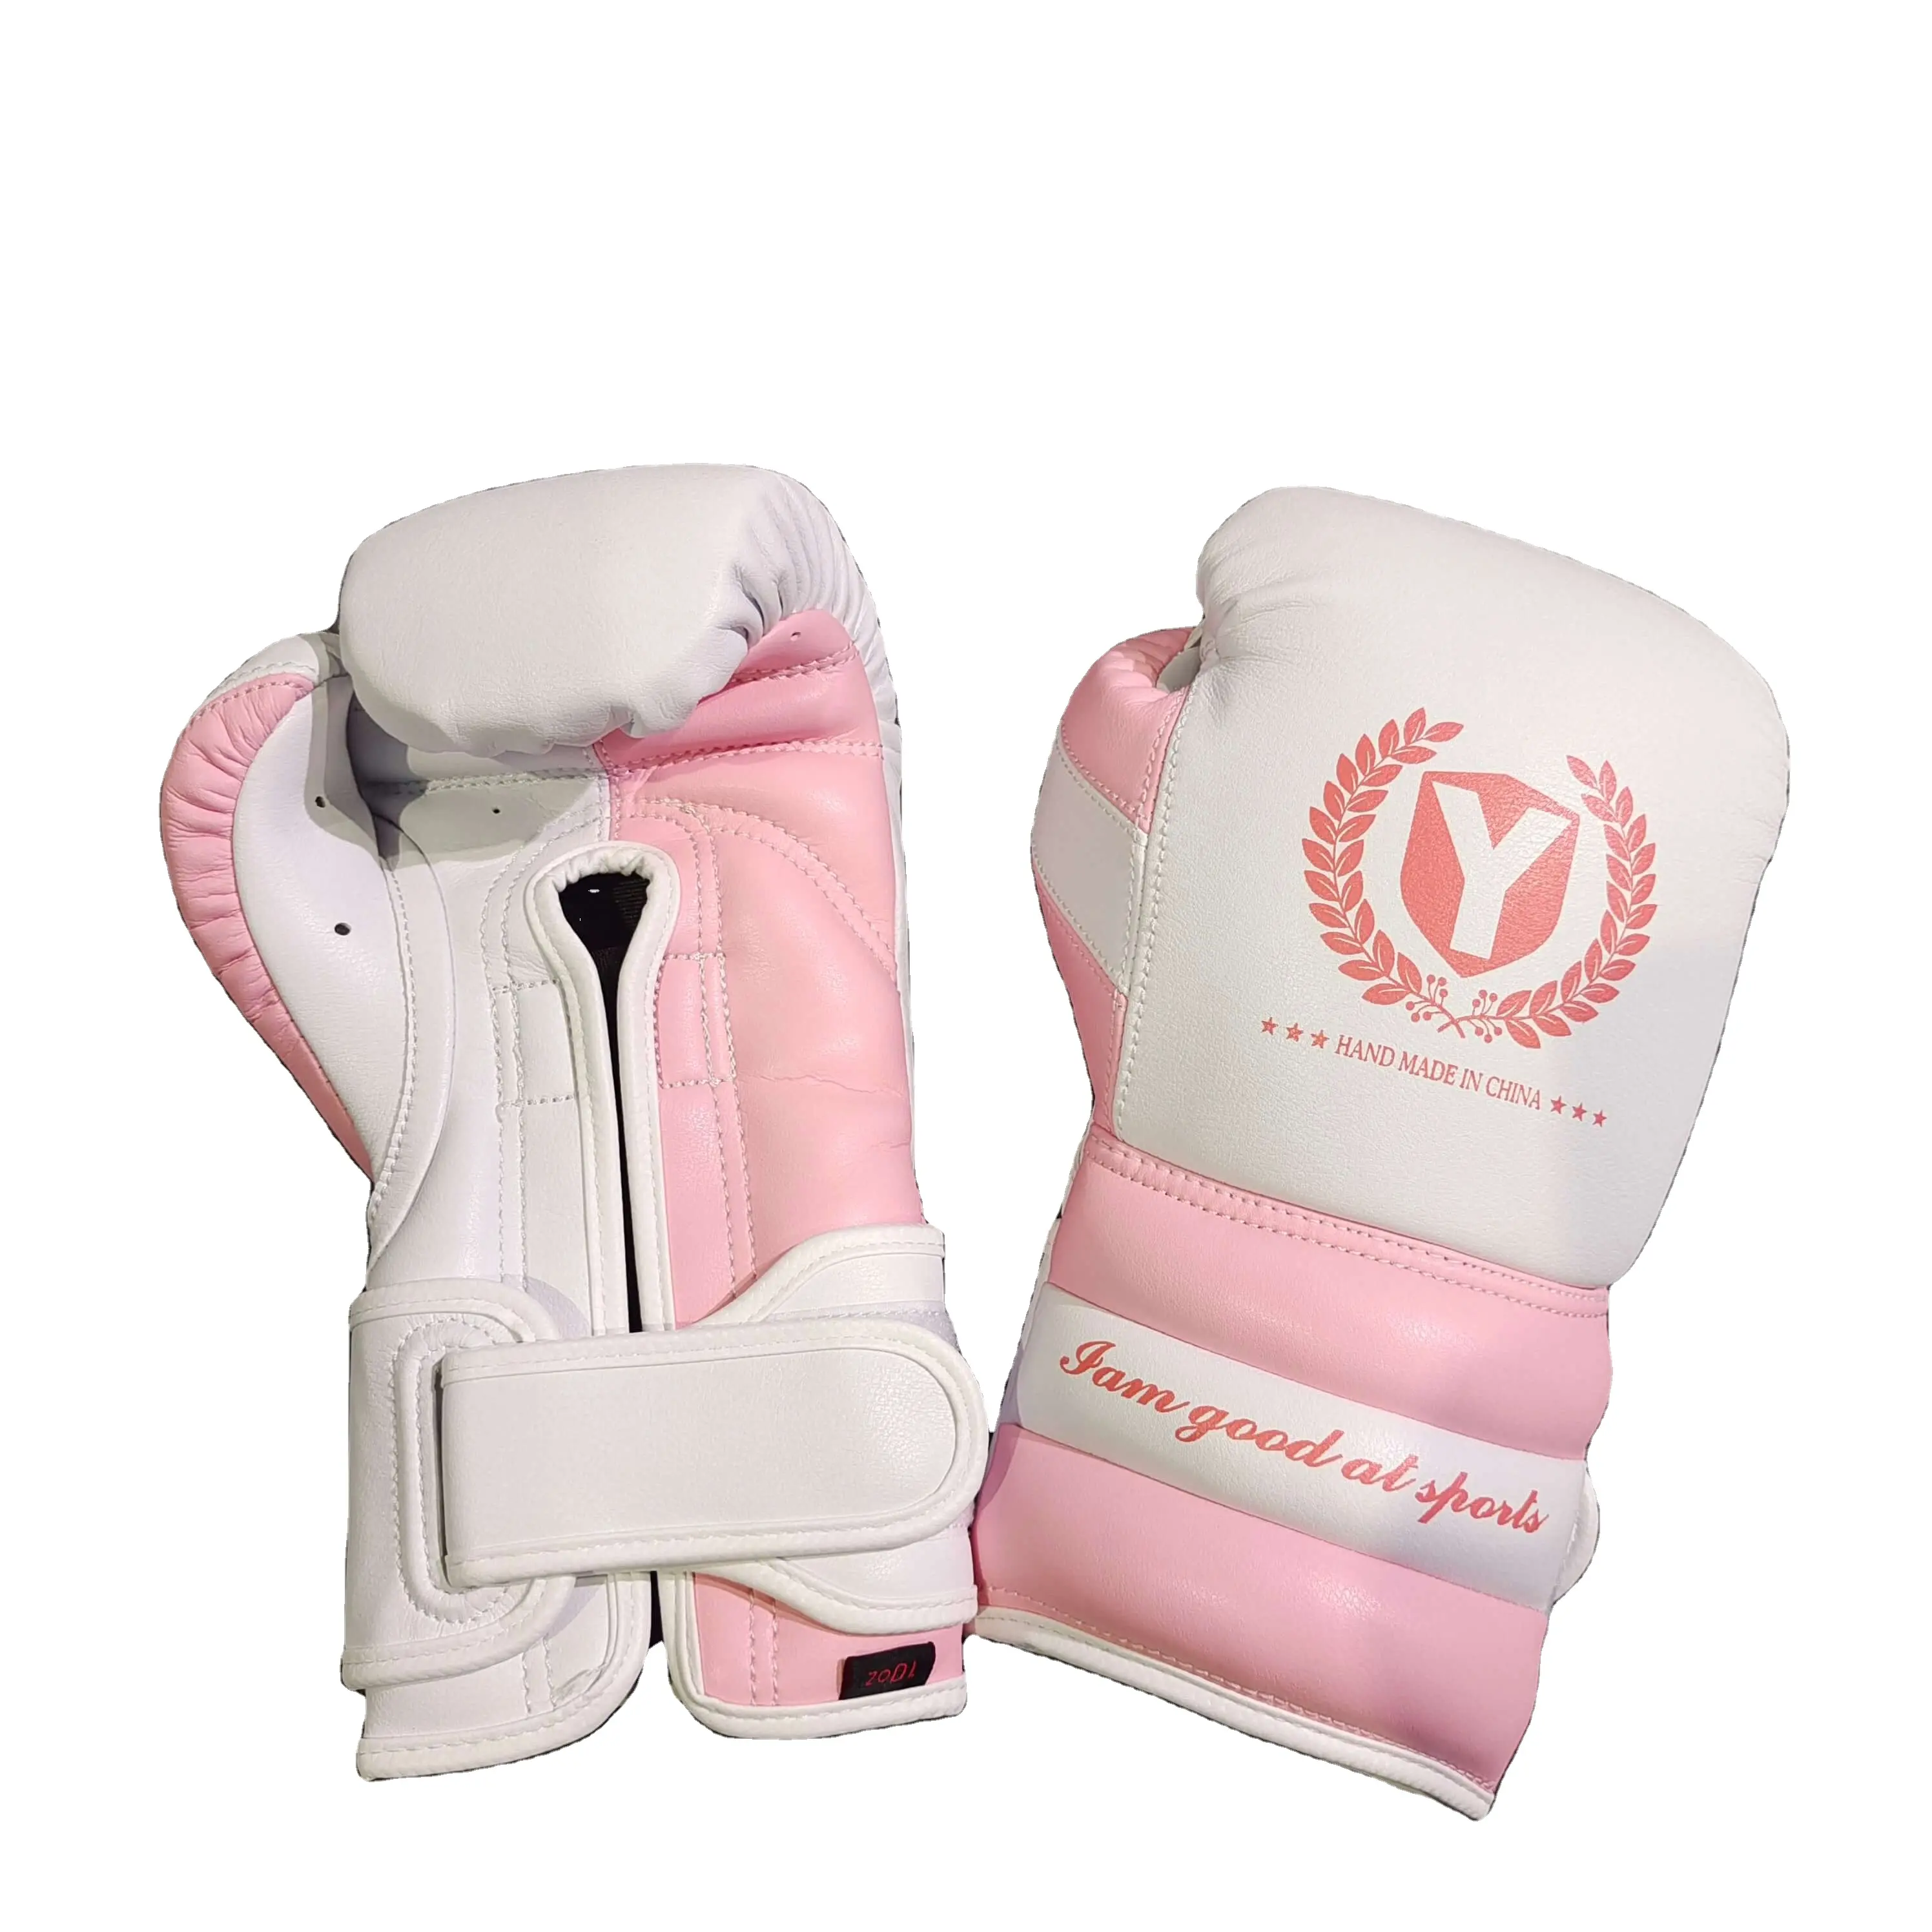 Sample free shipping Woosung factory price comfortable breathable pink leather boxing gloves